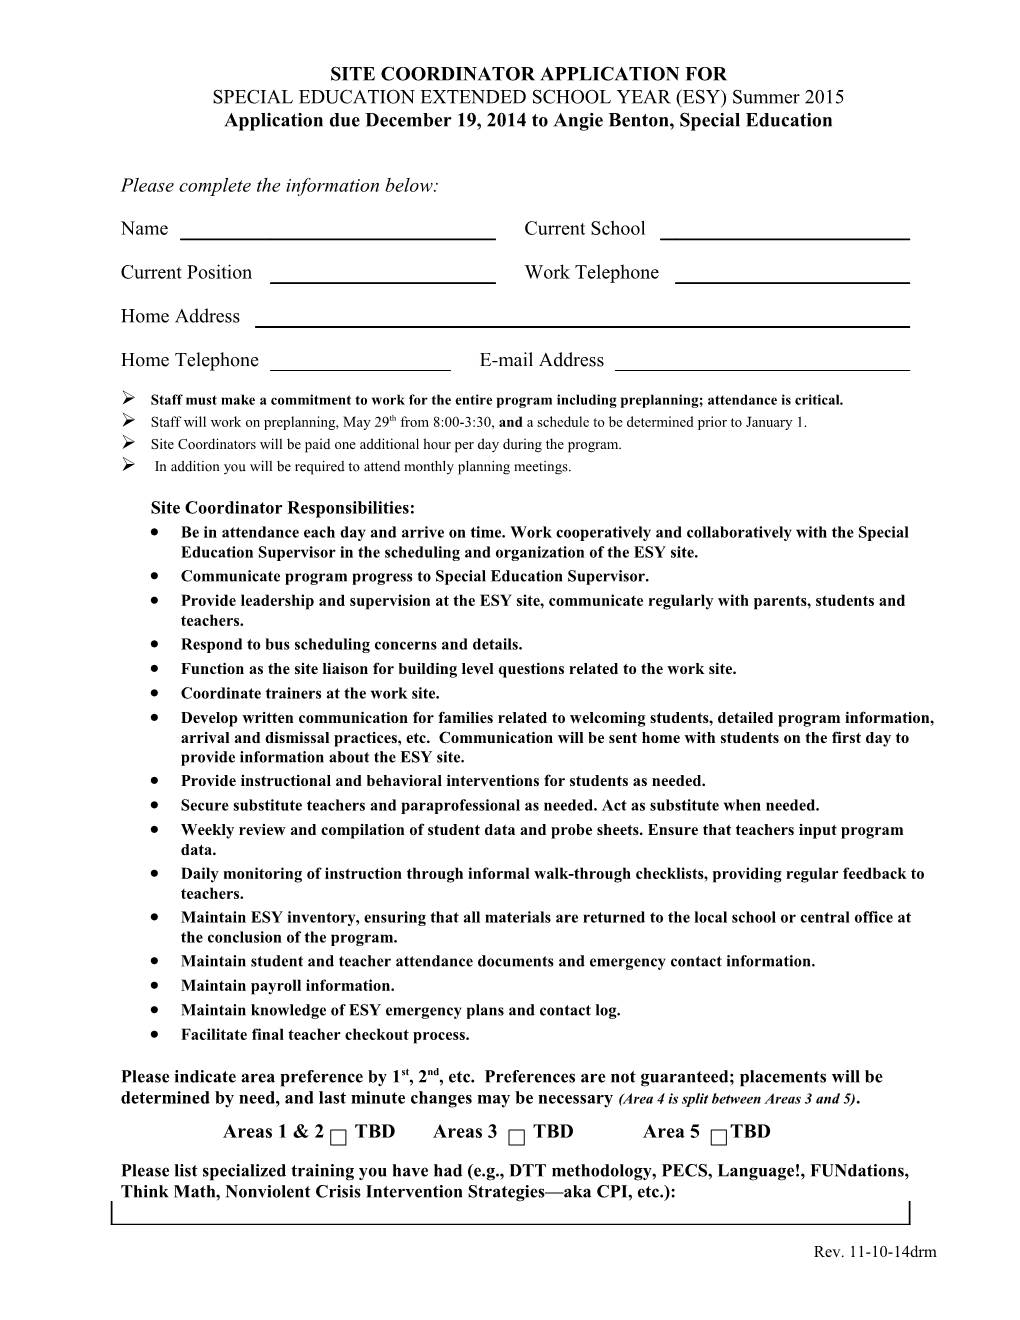 Staff Application For